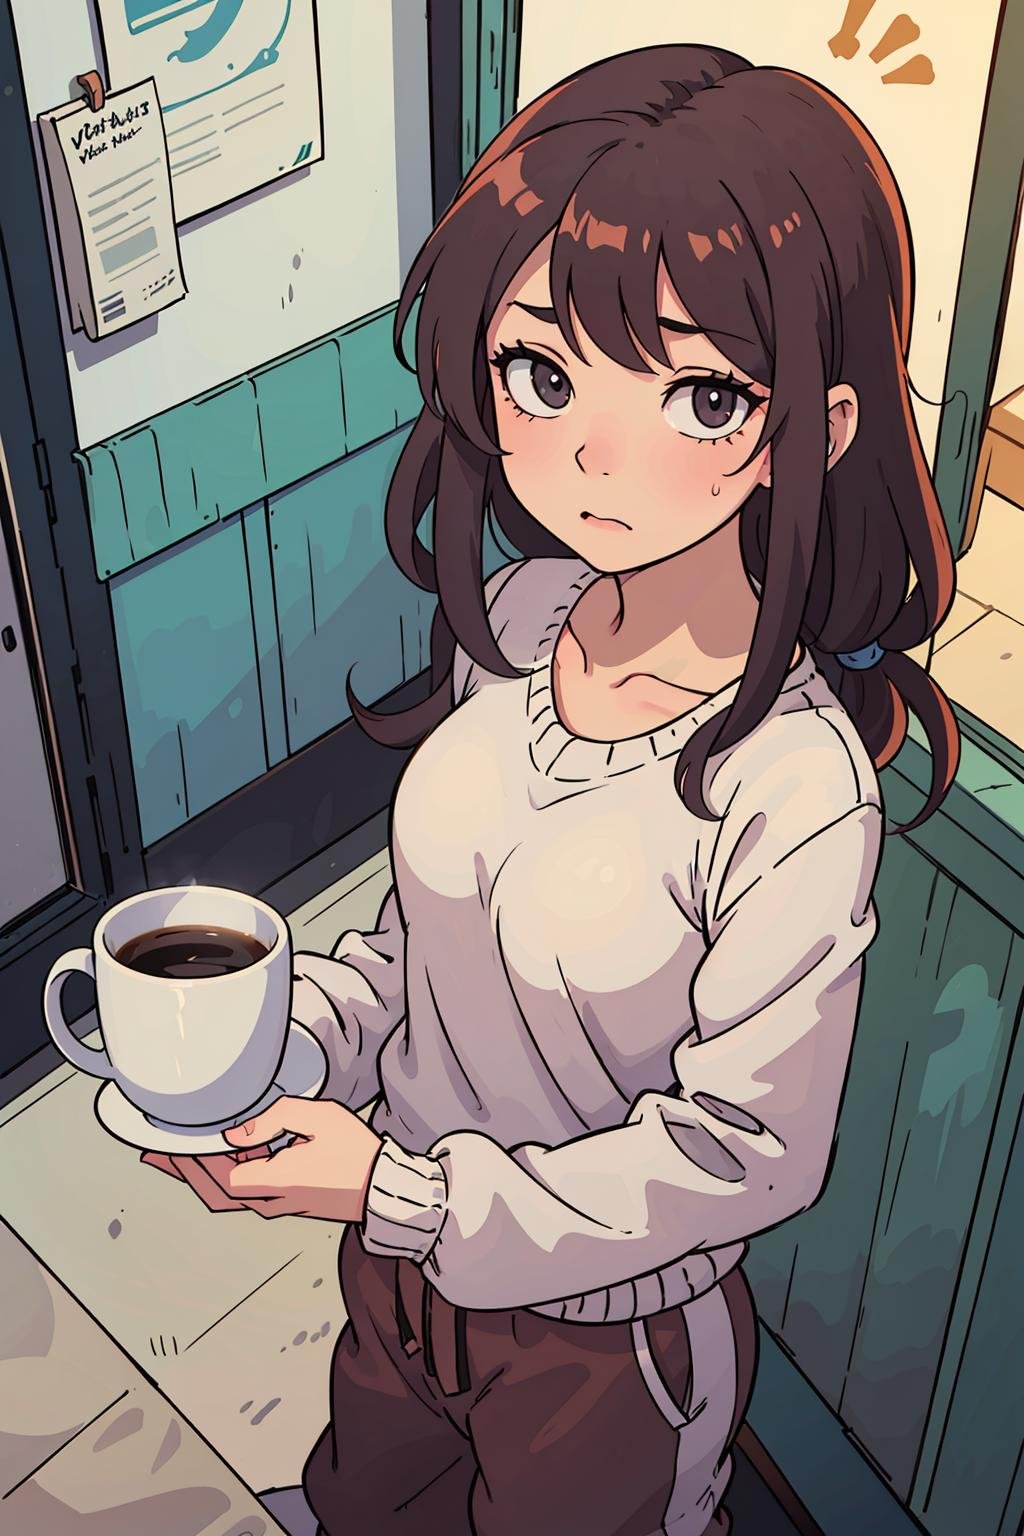 (best quality:0.8) perfect anime portrait illustration, front forward, a woman wearing cozy sweatpants looking tired in the hallway after waking up, holding a small mug of coffee